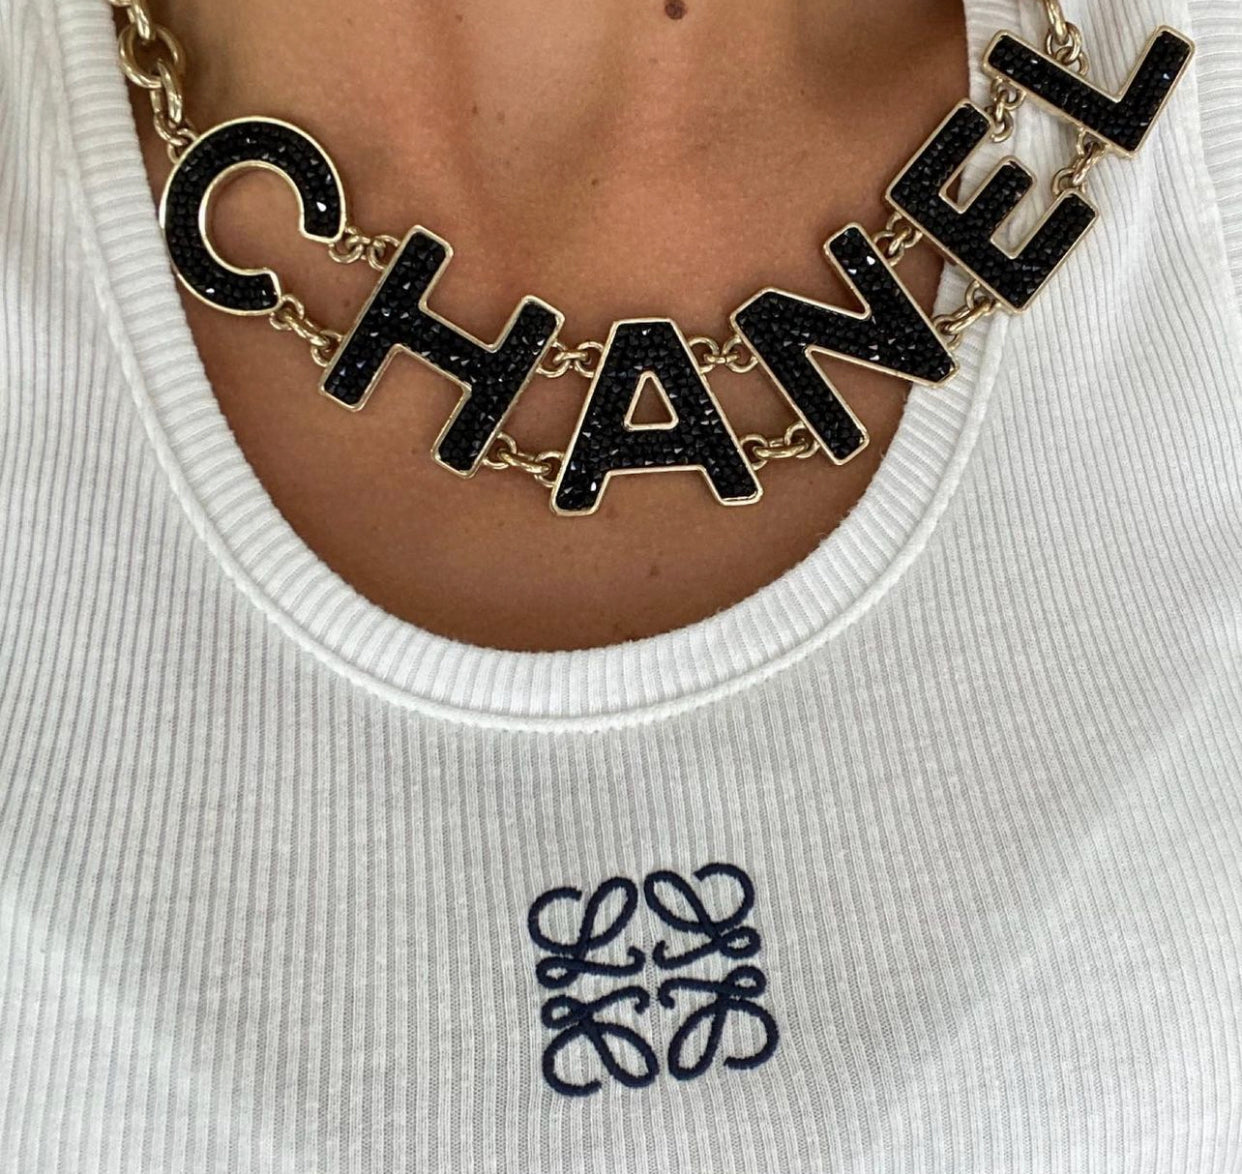 Chanel Black Crystal Chain ‘CHANEL’ Necklace